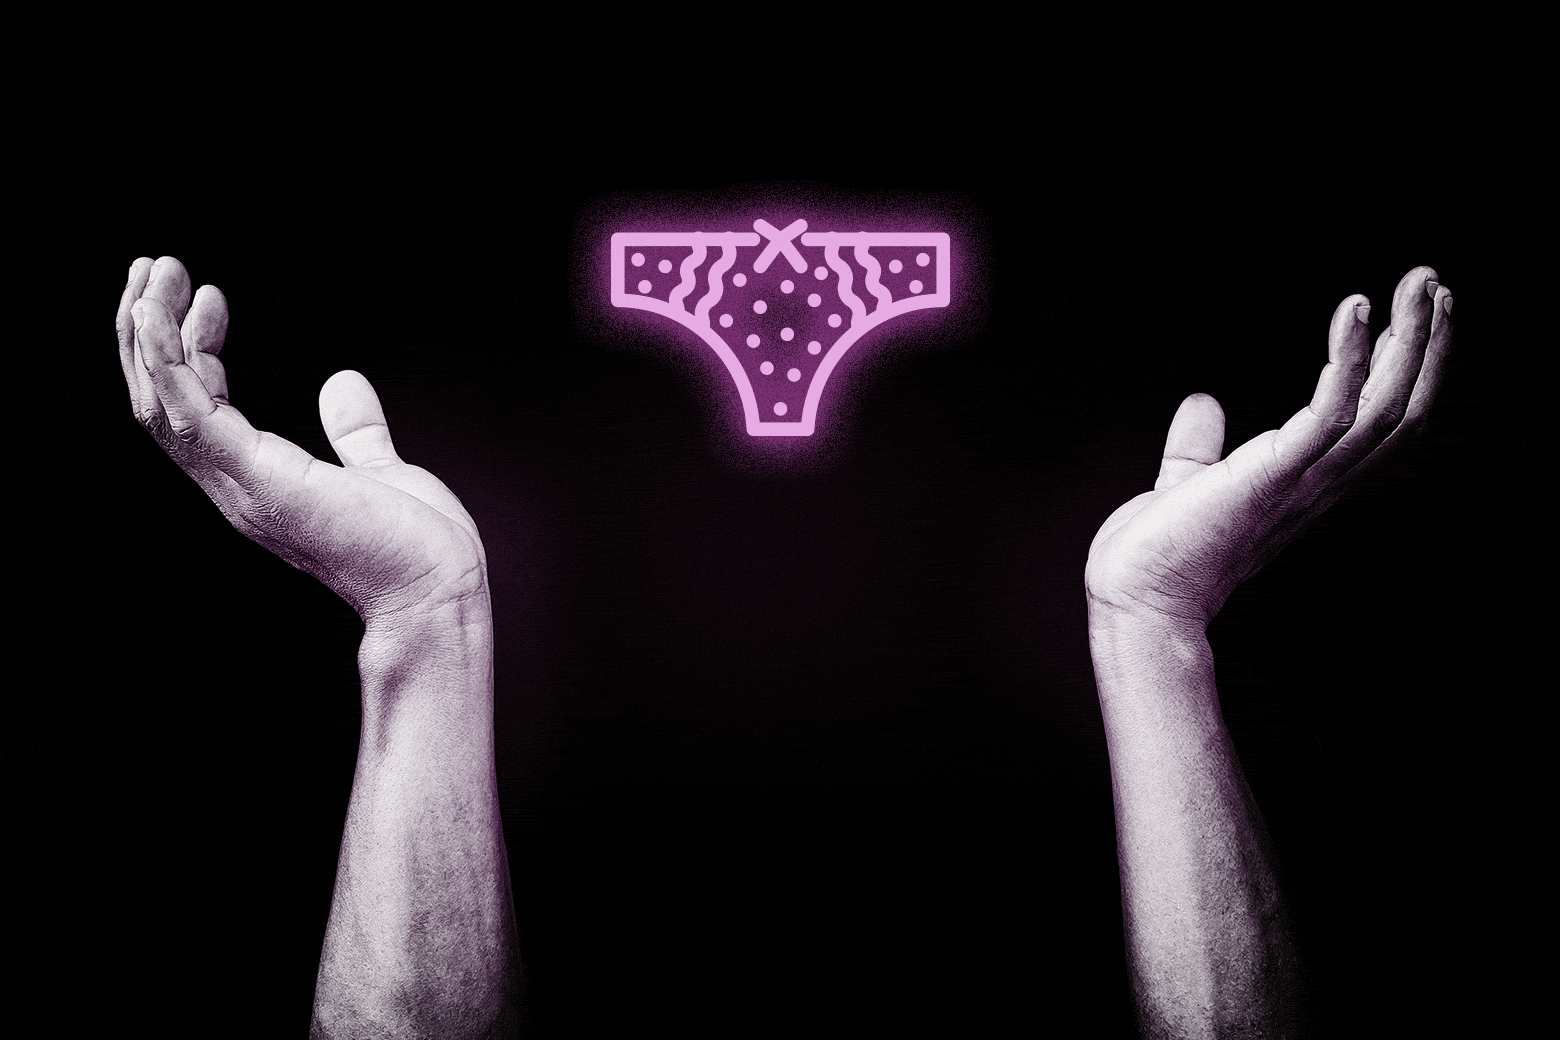 Man's hands thrown up in the air, a pair of women's panties floats above him.